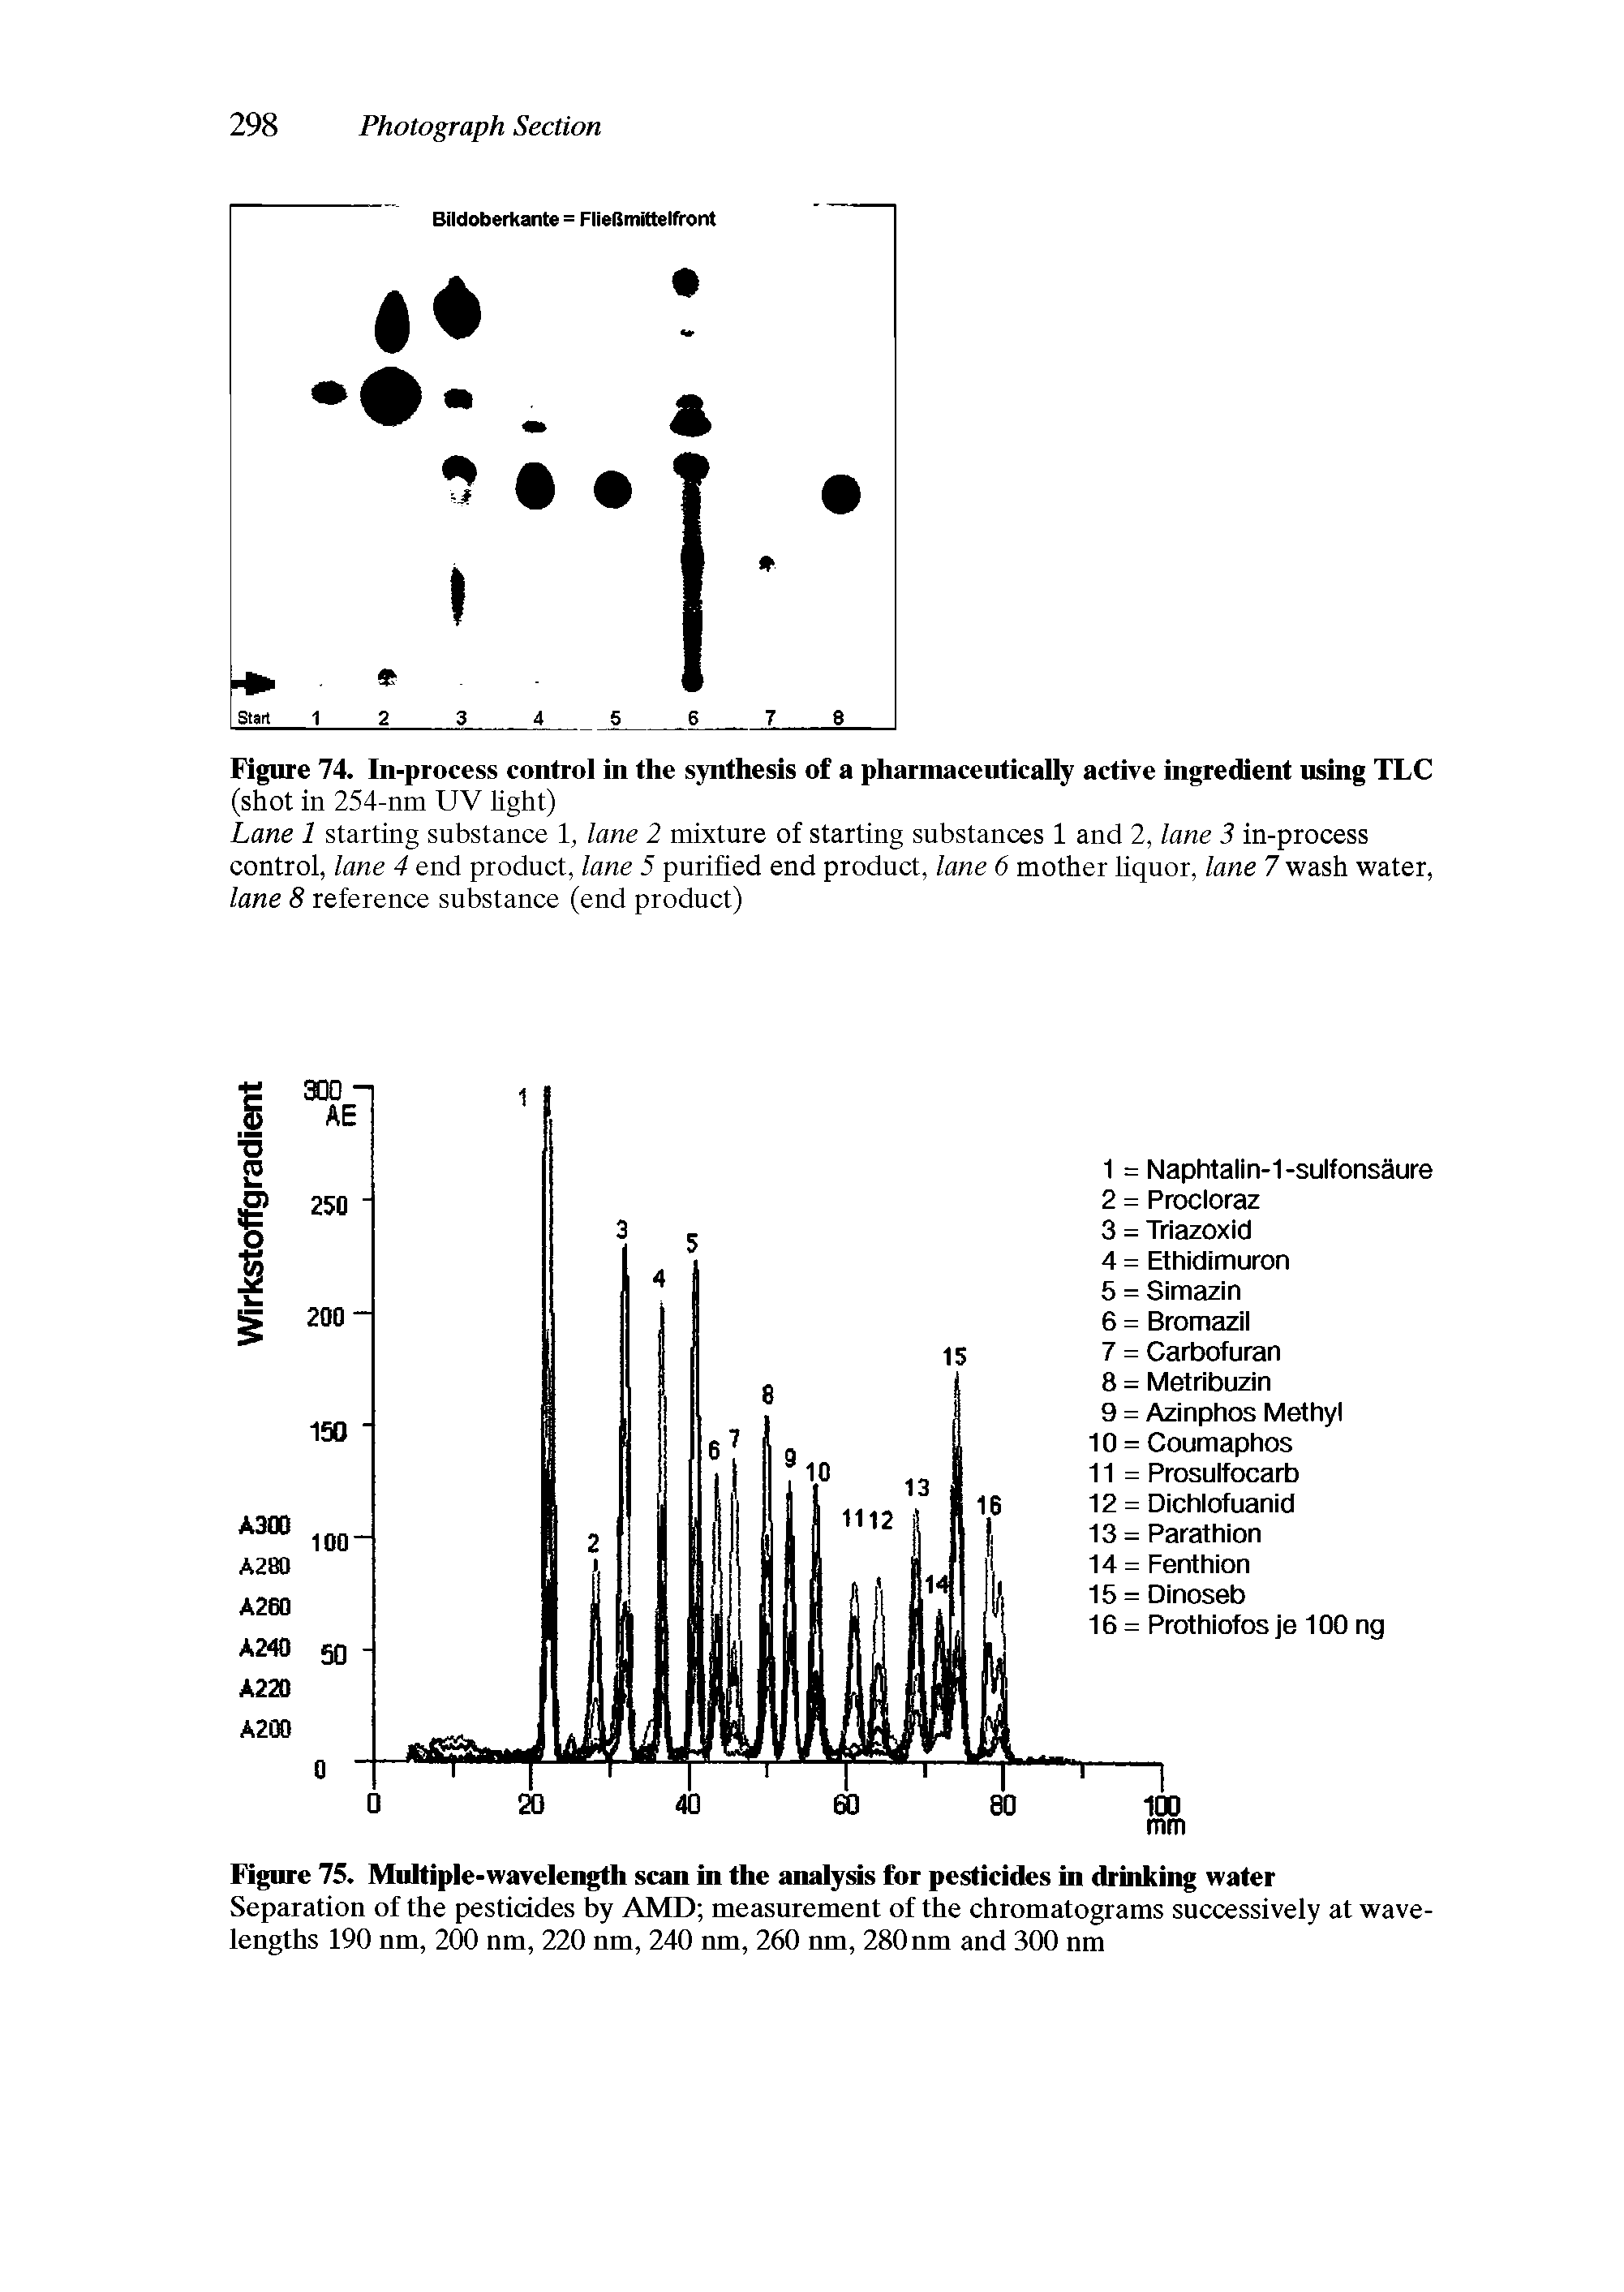 Figure 75. Multiple-wavelength scan in the analysis for pesticides in drinking water...